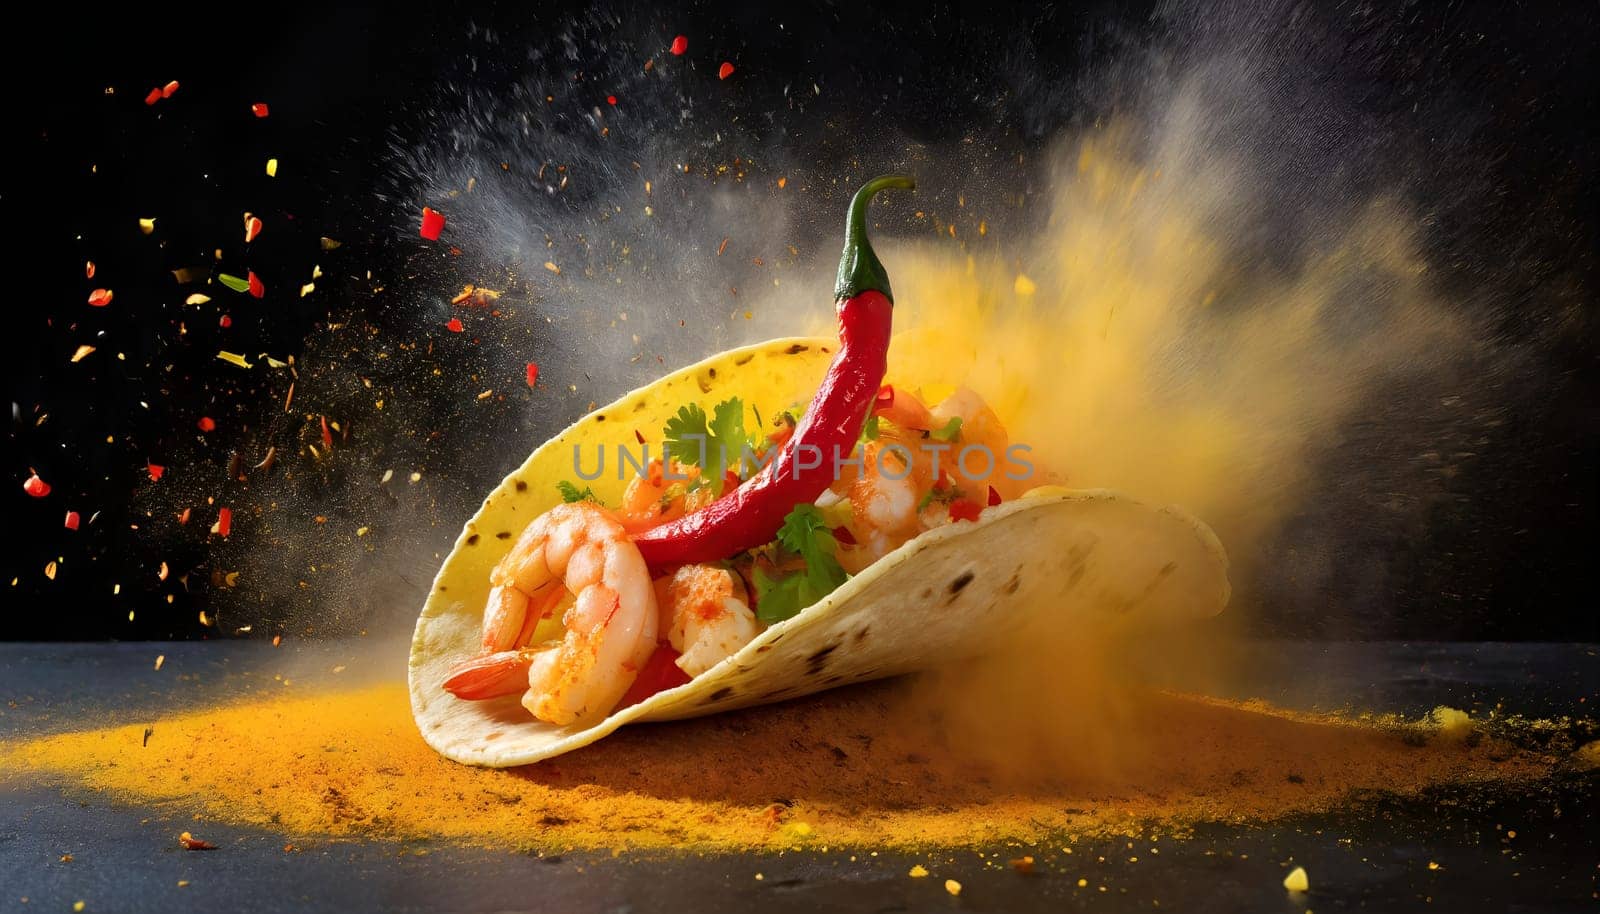 Powerful explosion of yellow dust from a shrimp taco. Falling tacos. High quality photo